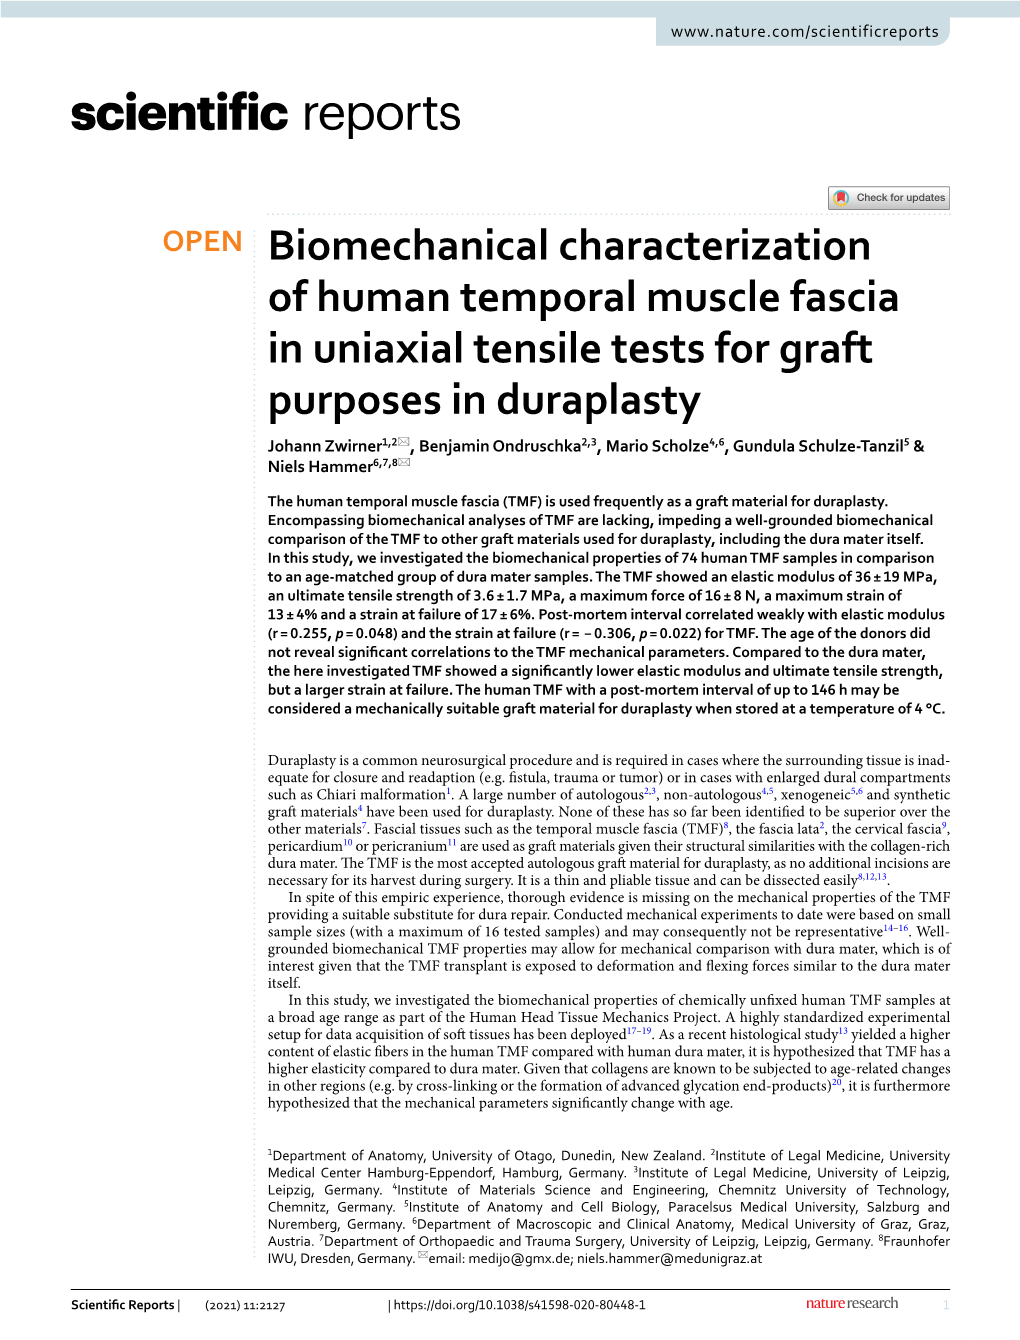 Biomechanical Characterization of Human Temporal Muscle Fascia In